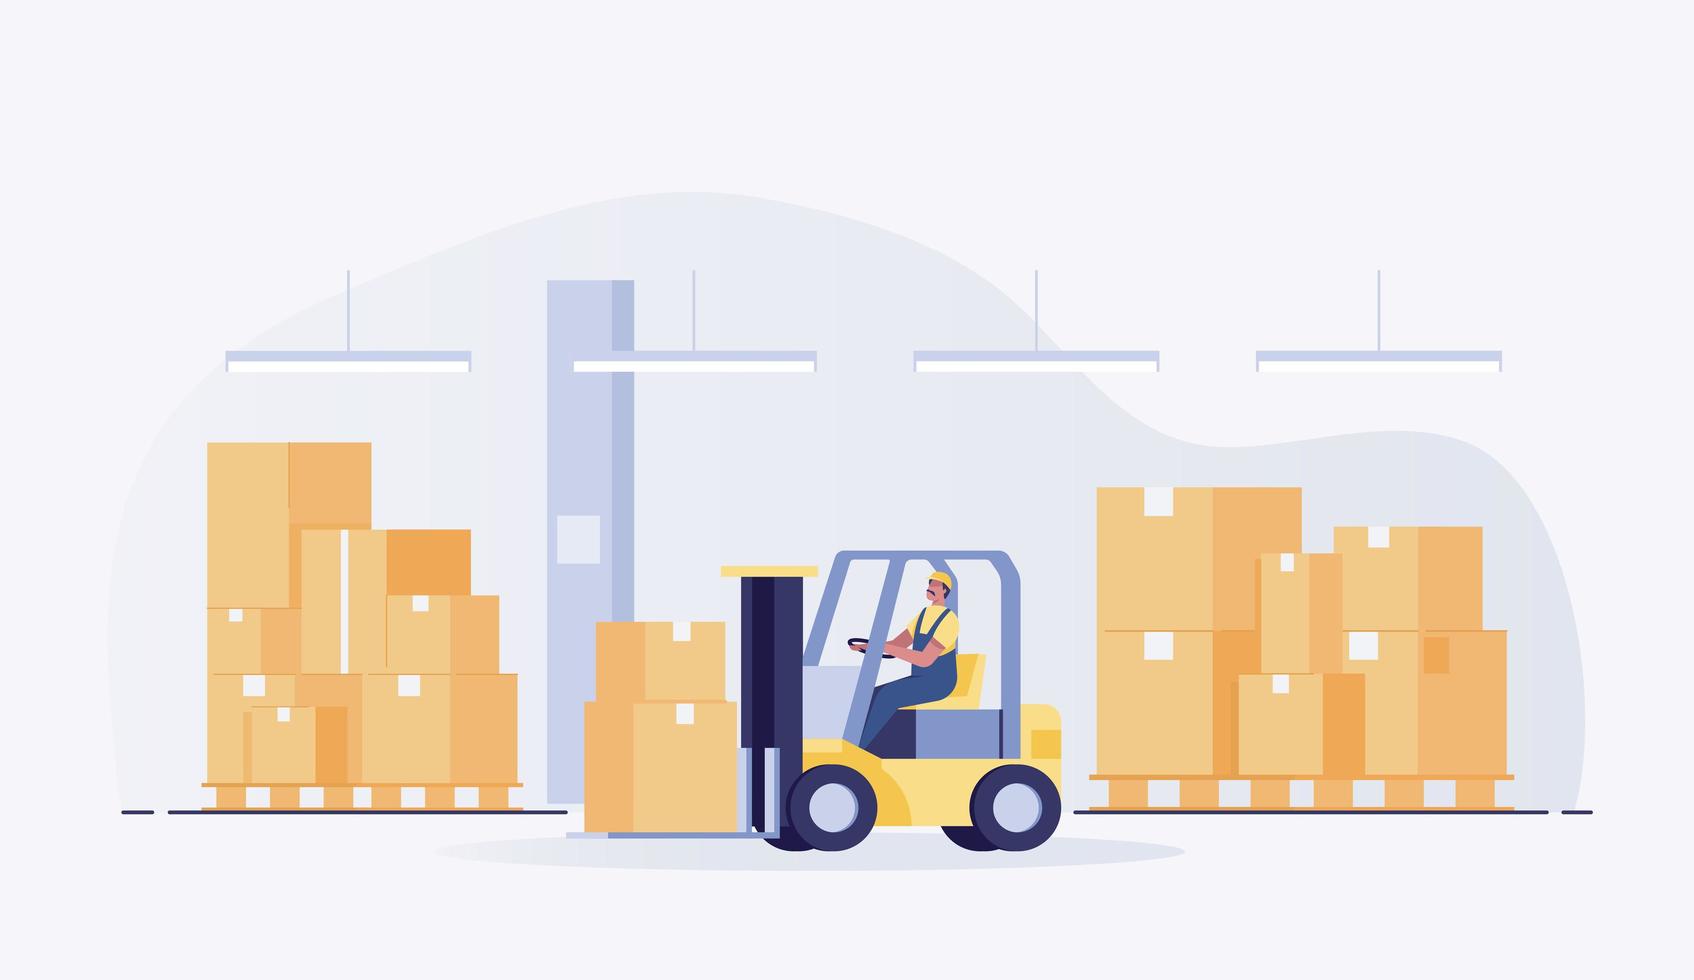 Warehouse man worker with forklift. vector illustration